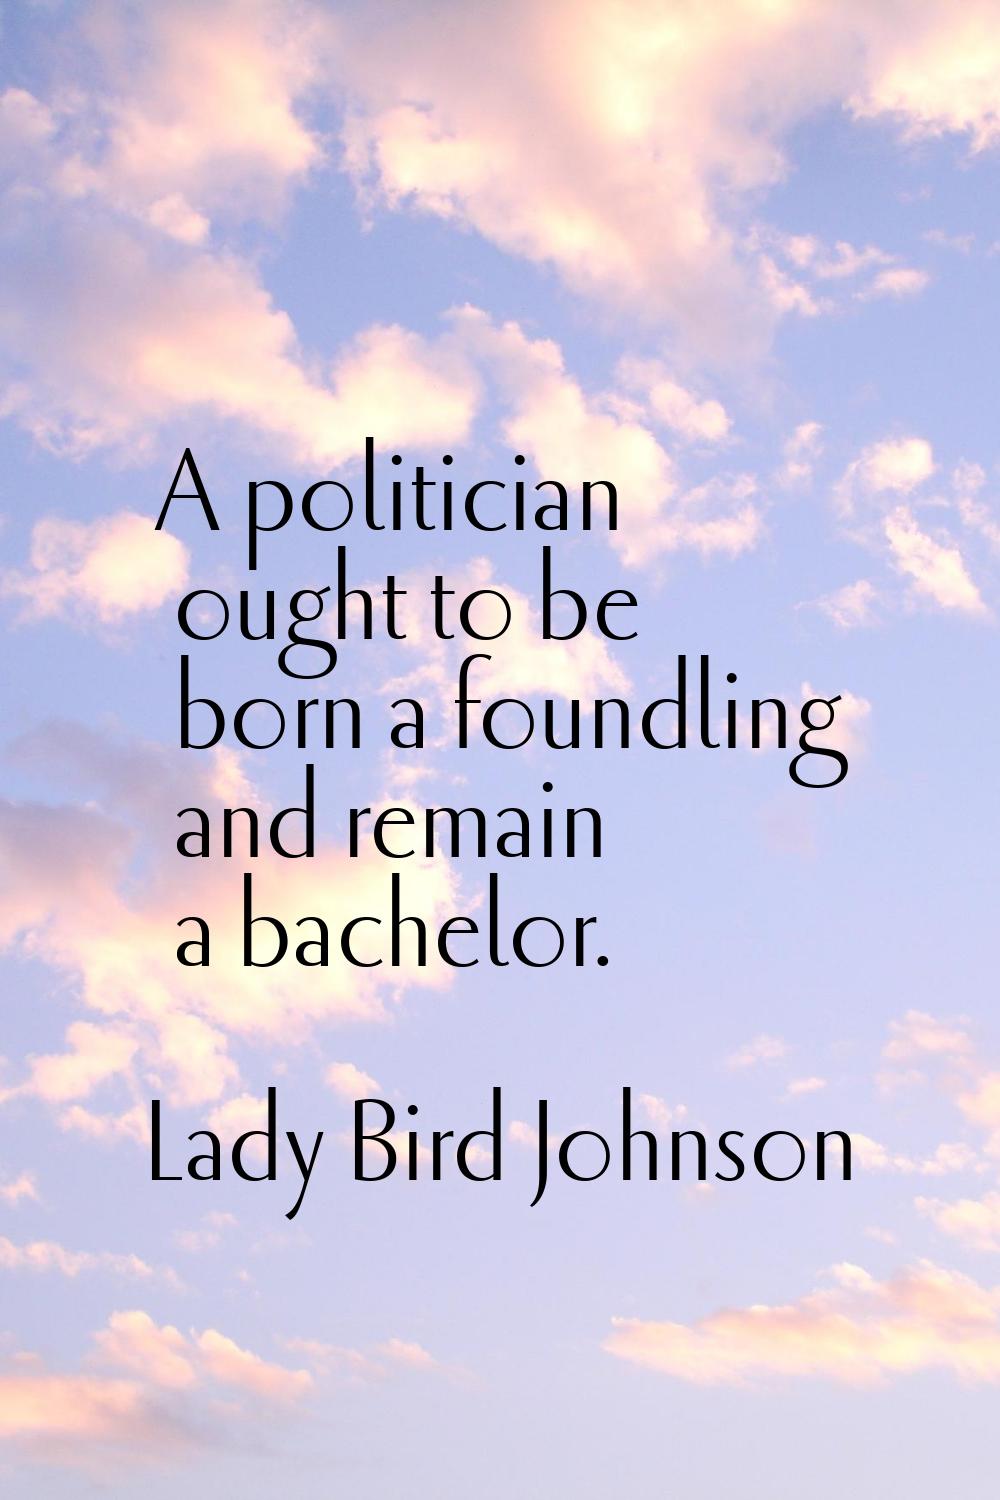 A politician ought to be born a foundling and remain a bachelor.